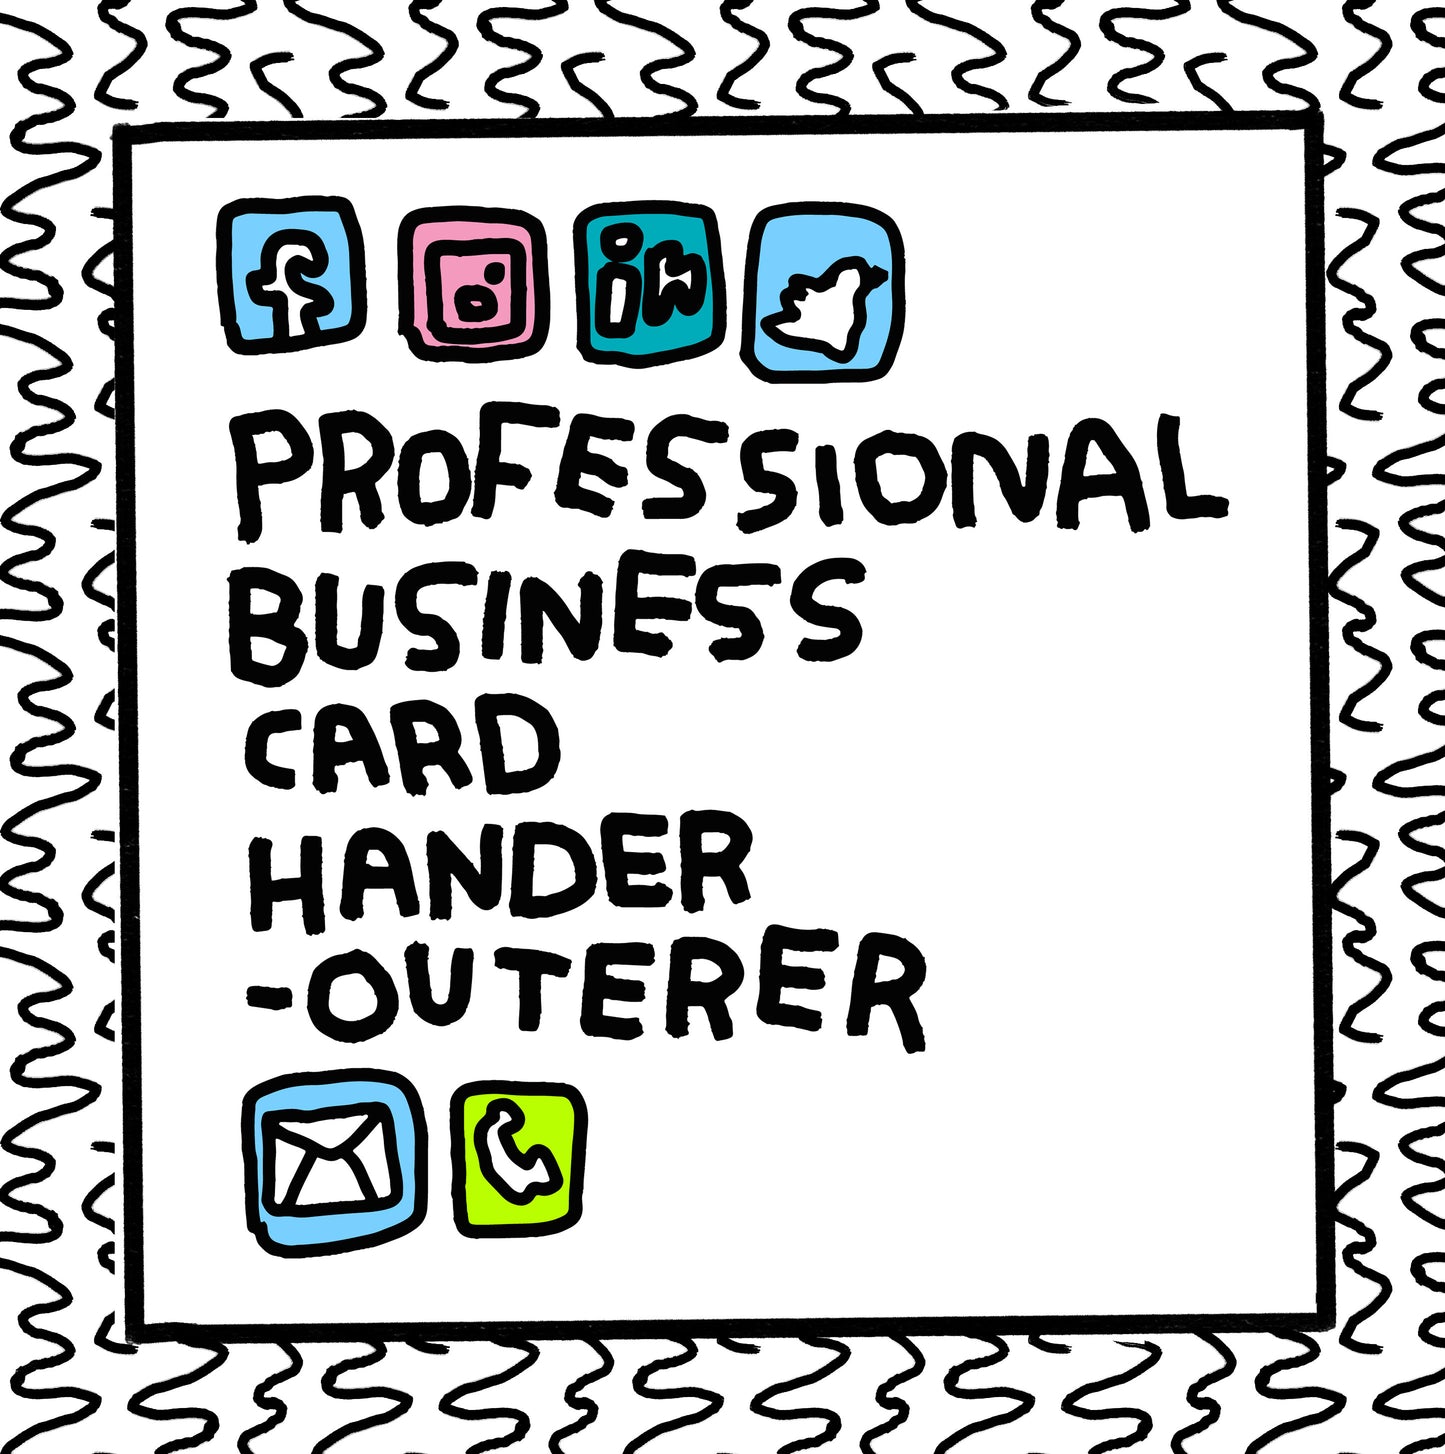 professional business card hander outer